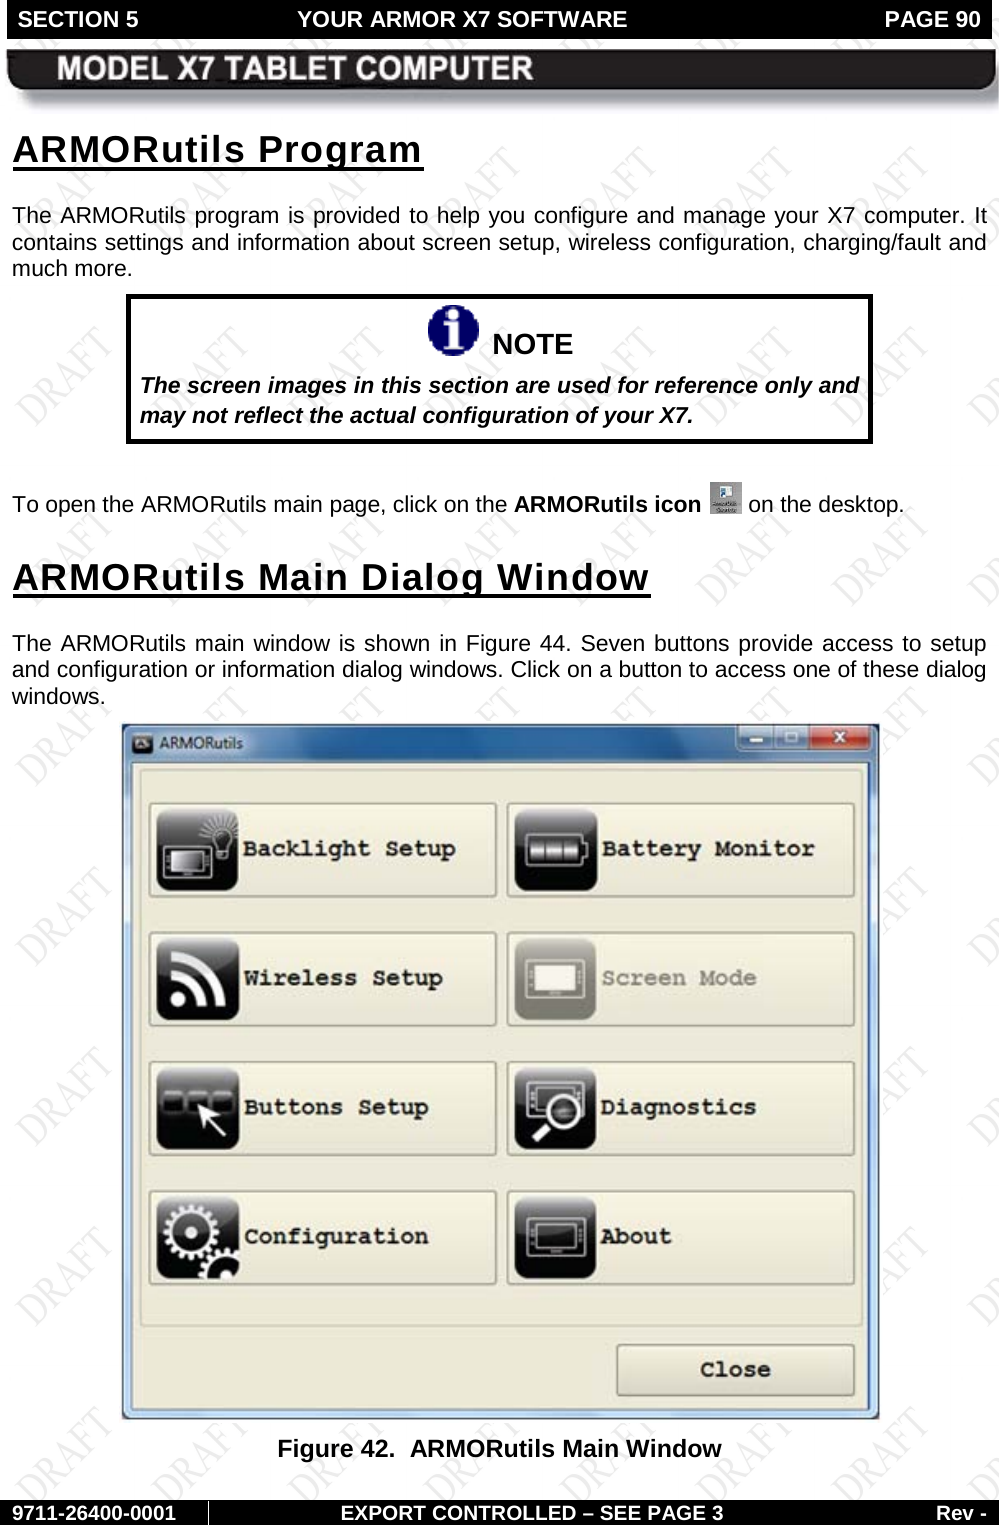 SECTION 5 YOUR ARMOR X7 SOFTWARE  PAGE 90        9711-26400-0001 EXPORT CONTROLLED – SEE PAGE 3 Rev - ARMORutils Program The ARMORutils program is provided to help you configure and manage your X7 computer. It contains settings and information about screen setup, wireless configuration, charging/fault and much more.   NOTE The screen images in this section are used for reference only and may not reflect the actual configuration of your X7.   To open the ARMORutils main page, click on the ARMORutils icon   on the desktop. ARMORutils Main Dialog Window The ARMORutils main window is shown in Figure 44. Seven buttons provide access to setup and configuration or information dialog windows. Click on a button to access one of these dialog windows.  Figure 42.  ARMORutils Main Window  